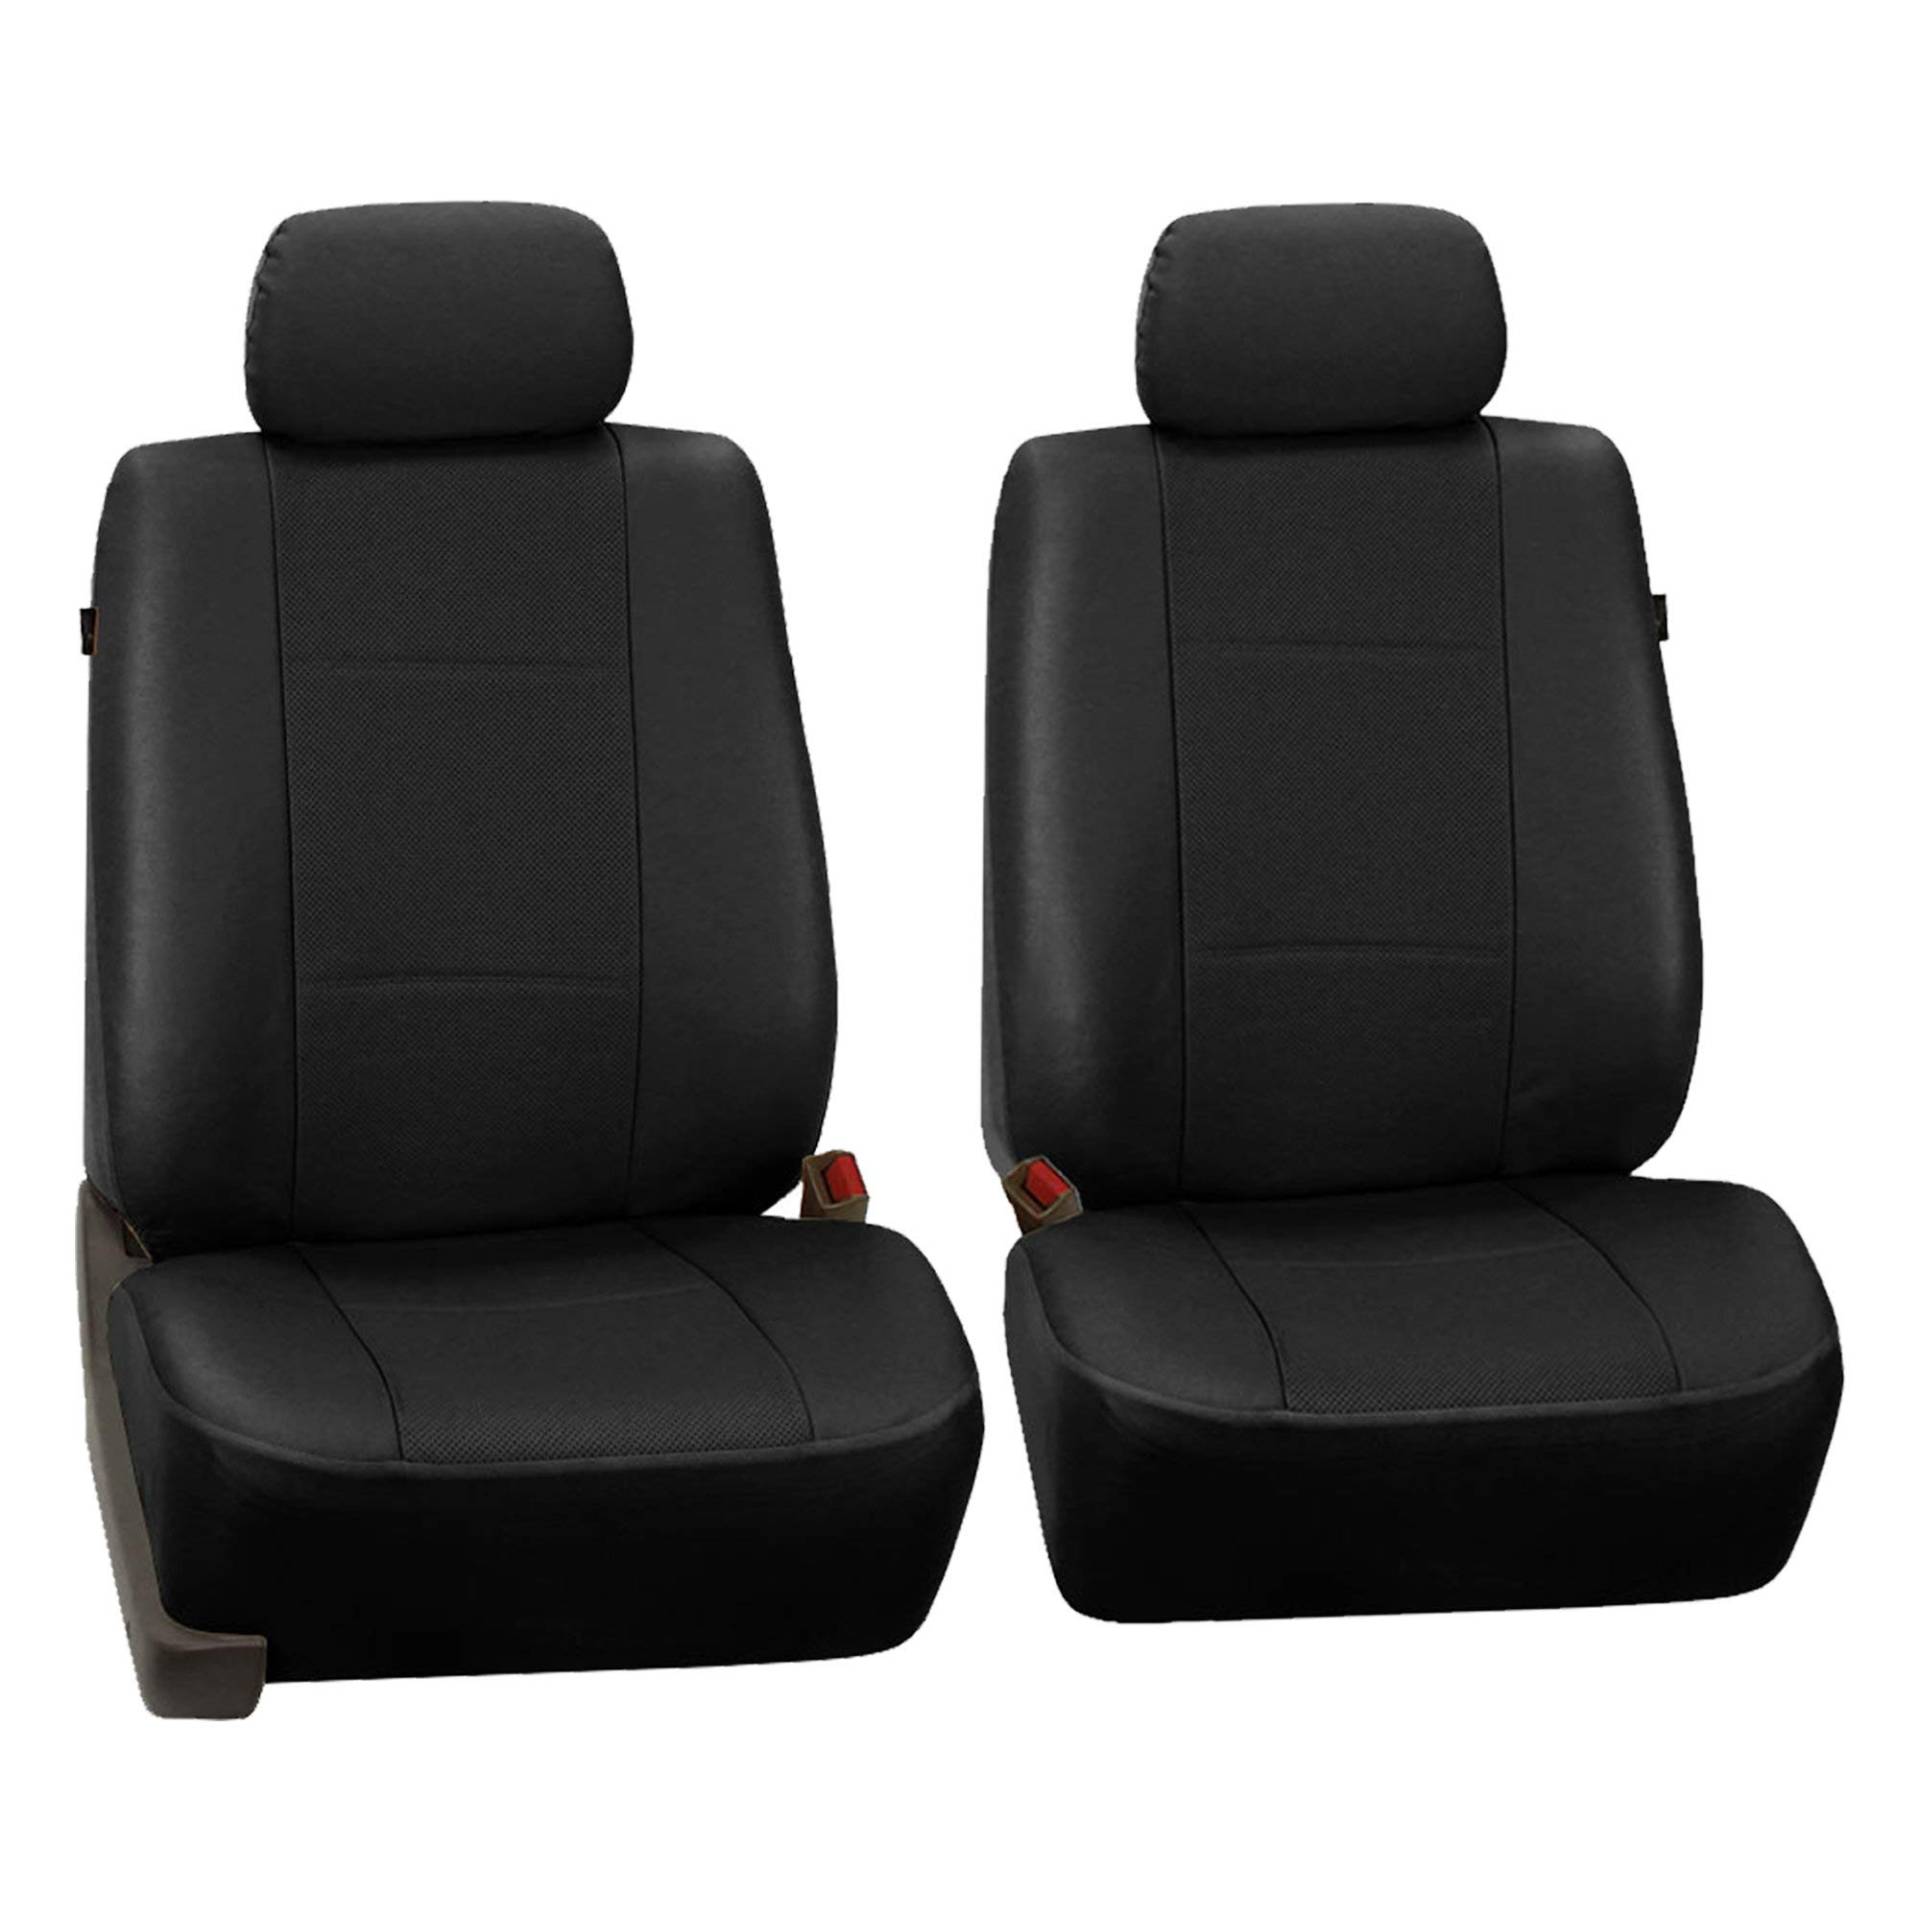 FH Group PU007BLACK102 Black Deluxe Leatherette Bucket Seat Cover, Set of 2 (Airbag Compatible), black-half von FH GROUP